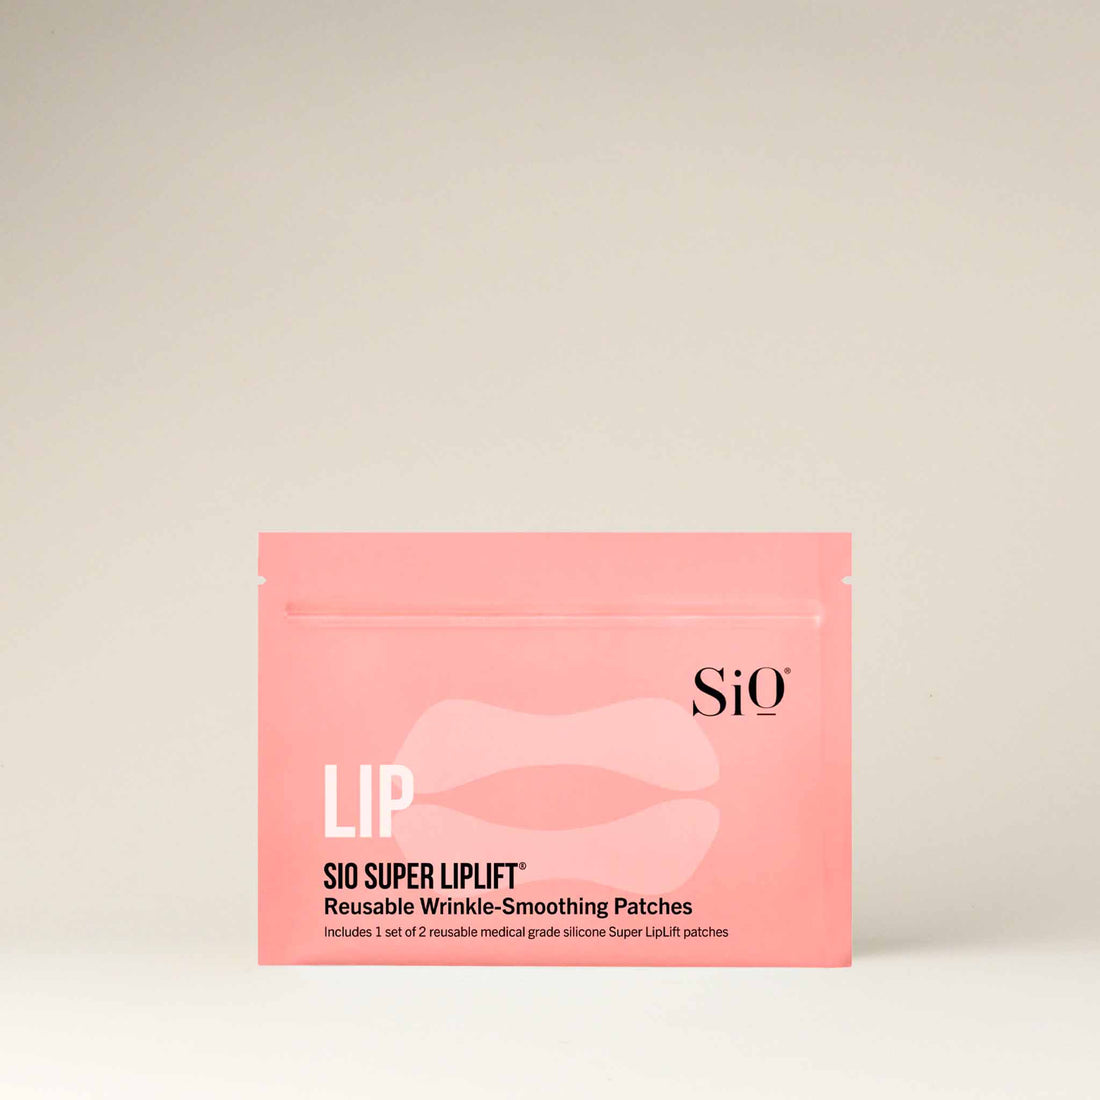 Super LipLift Wrinkle-Smoothing Patches